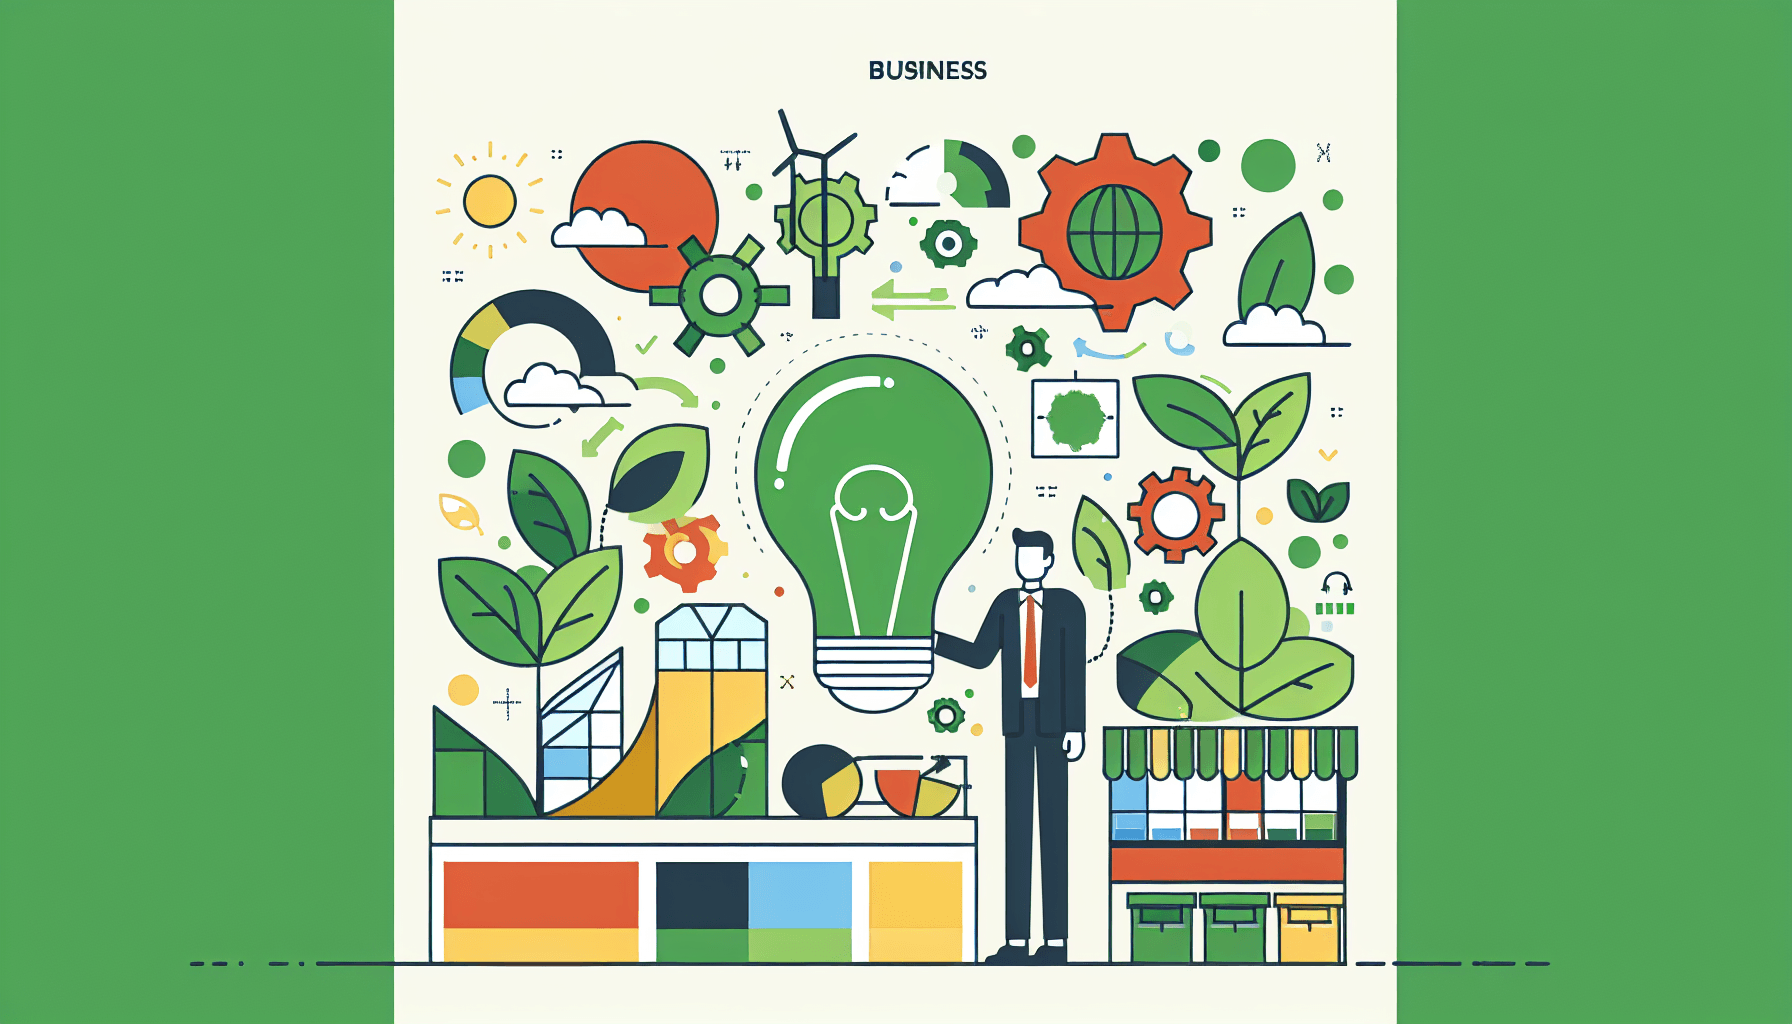 Green Business Model Innovation in flat illustration style and white background, red #f47574, green #88c7a8, yellow #fcc44b, and blue #645bc8 colors.